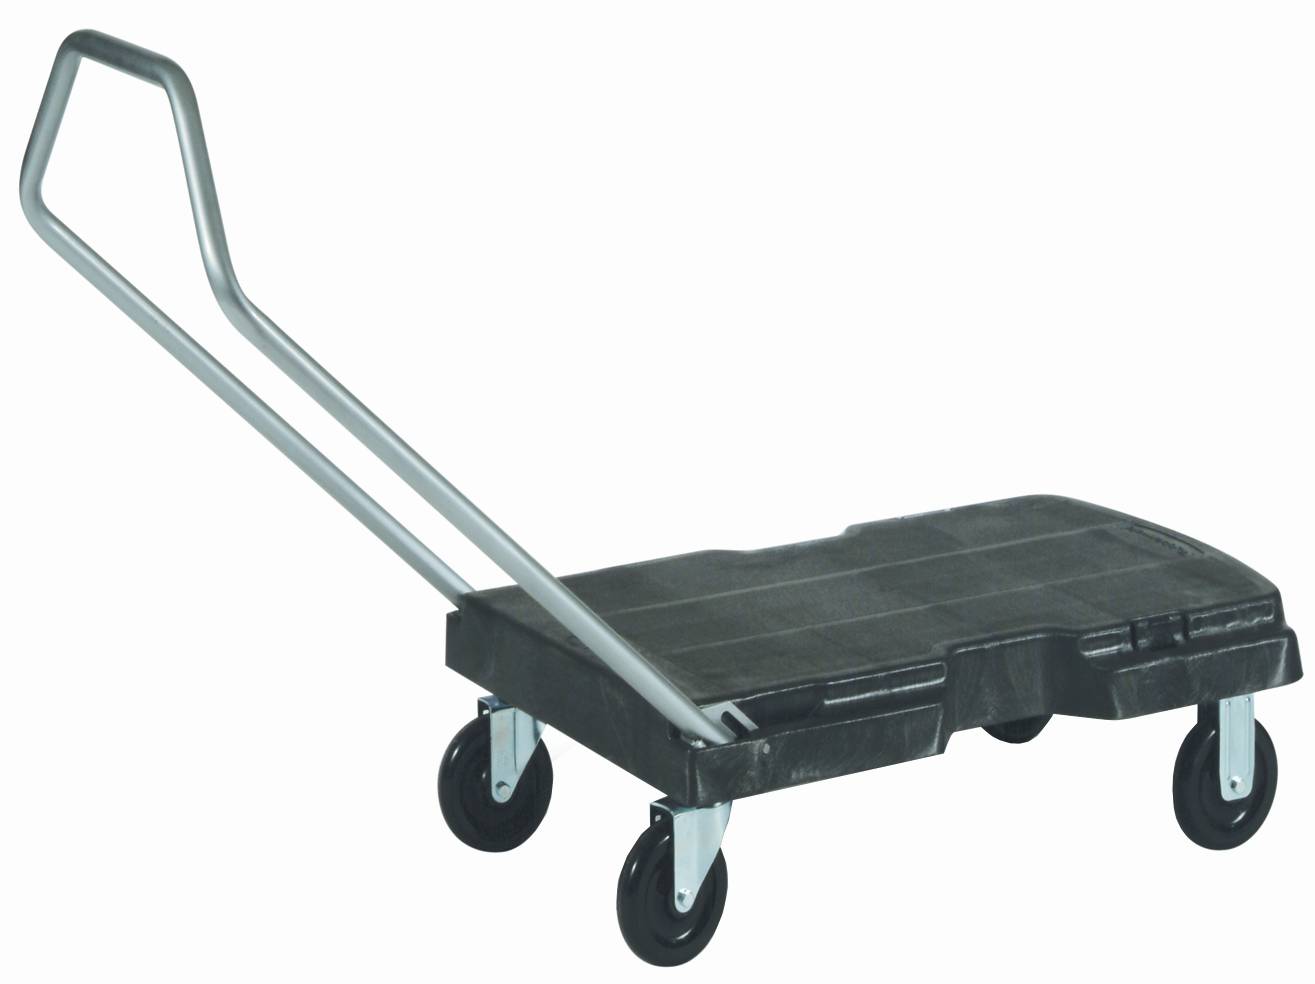 4401 Home and Office Cart, Standard Duty with ergonomic handle and 5 dia.  (12.7 cm) x 1 1/4 w Casters